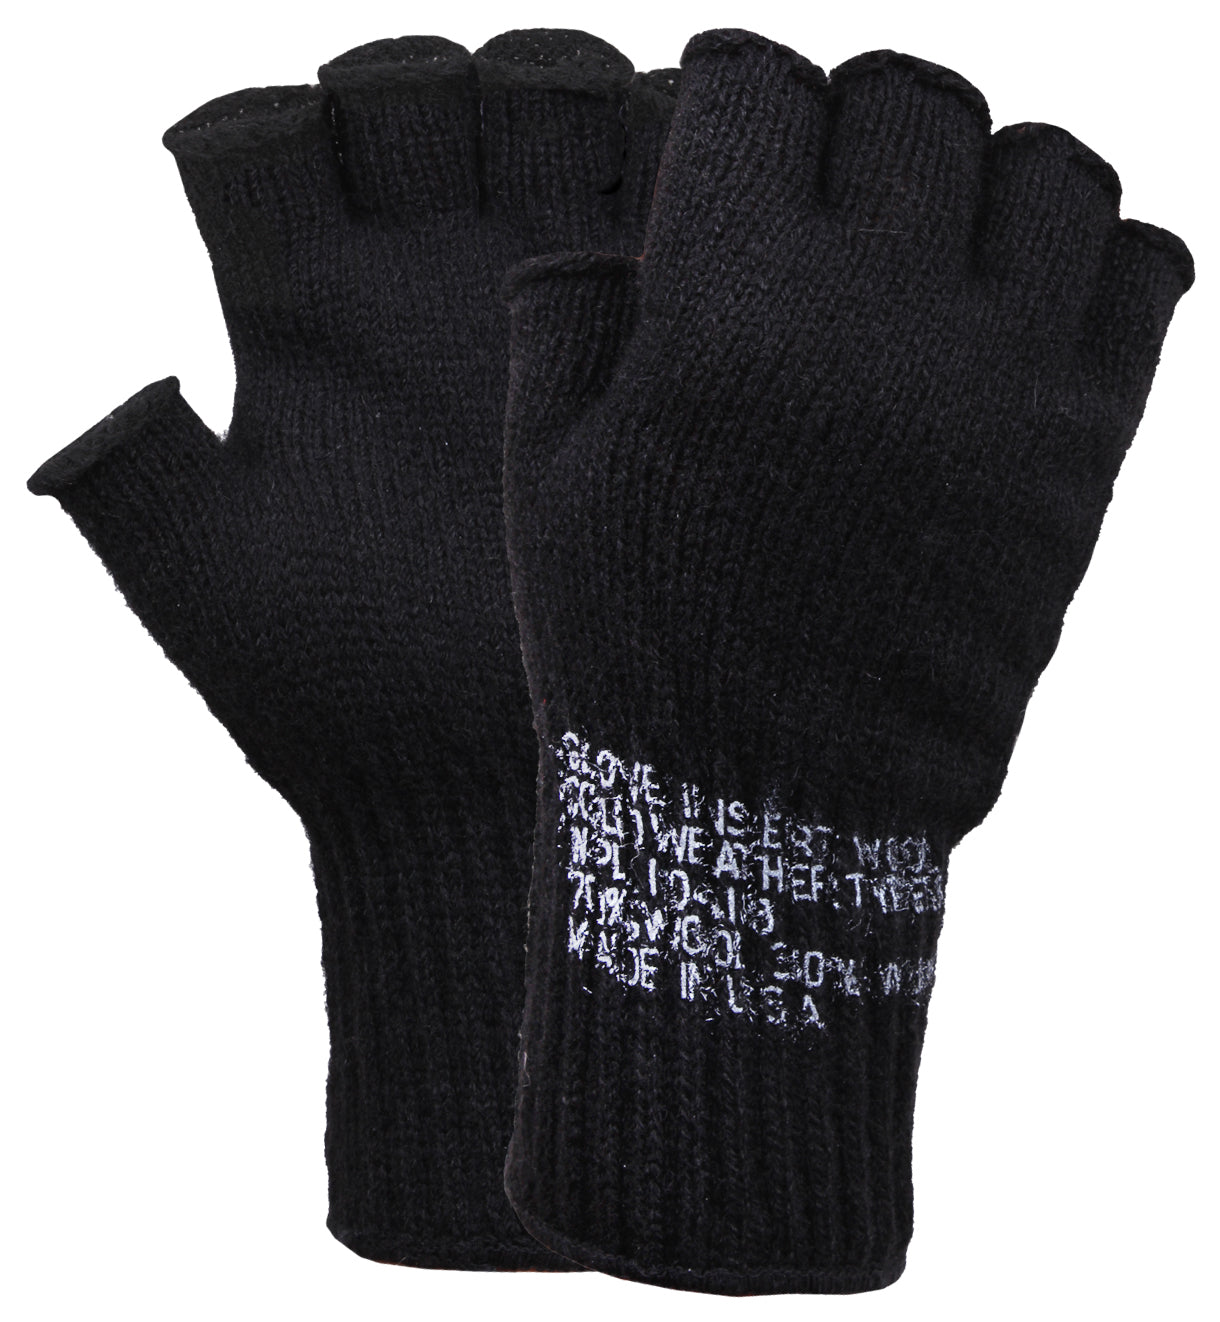 Fingerless Wool Gloves Genuine GI Tactical Army Glove Liner Made In USA